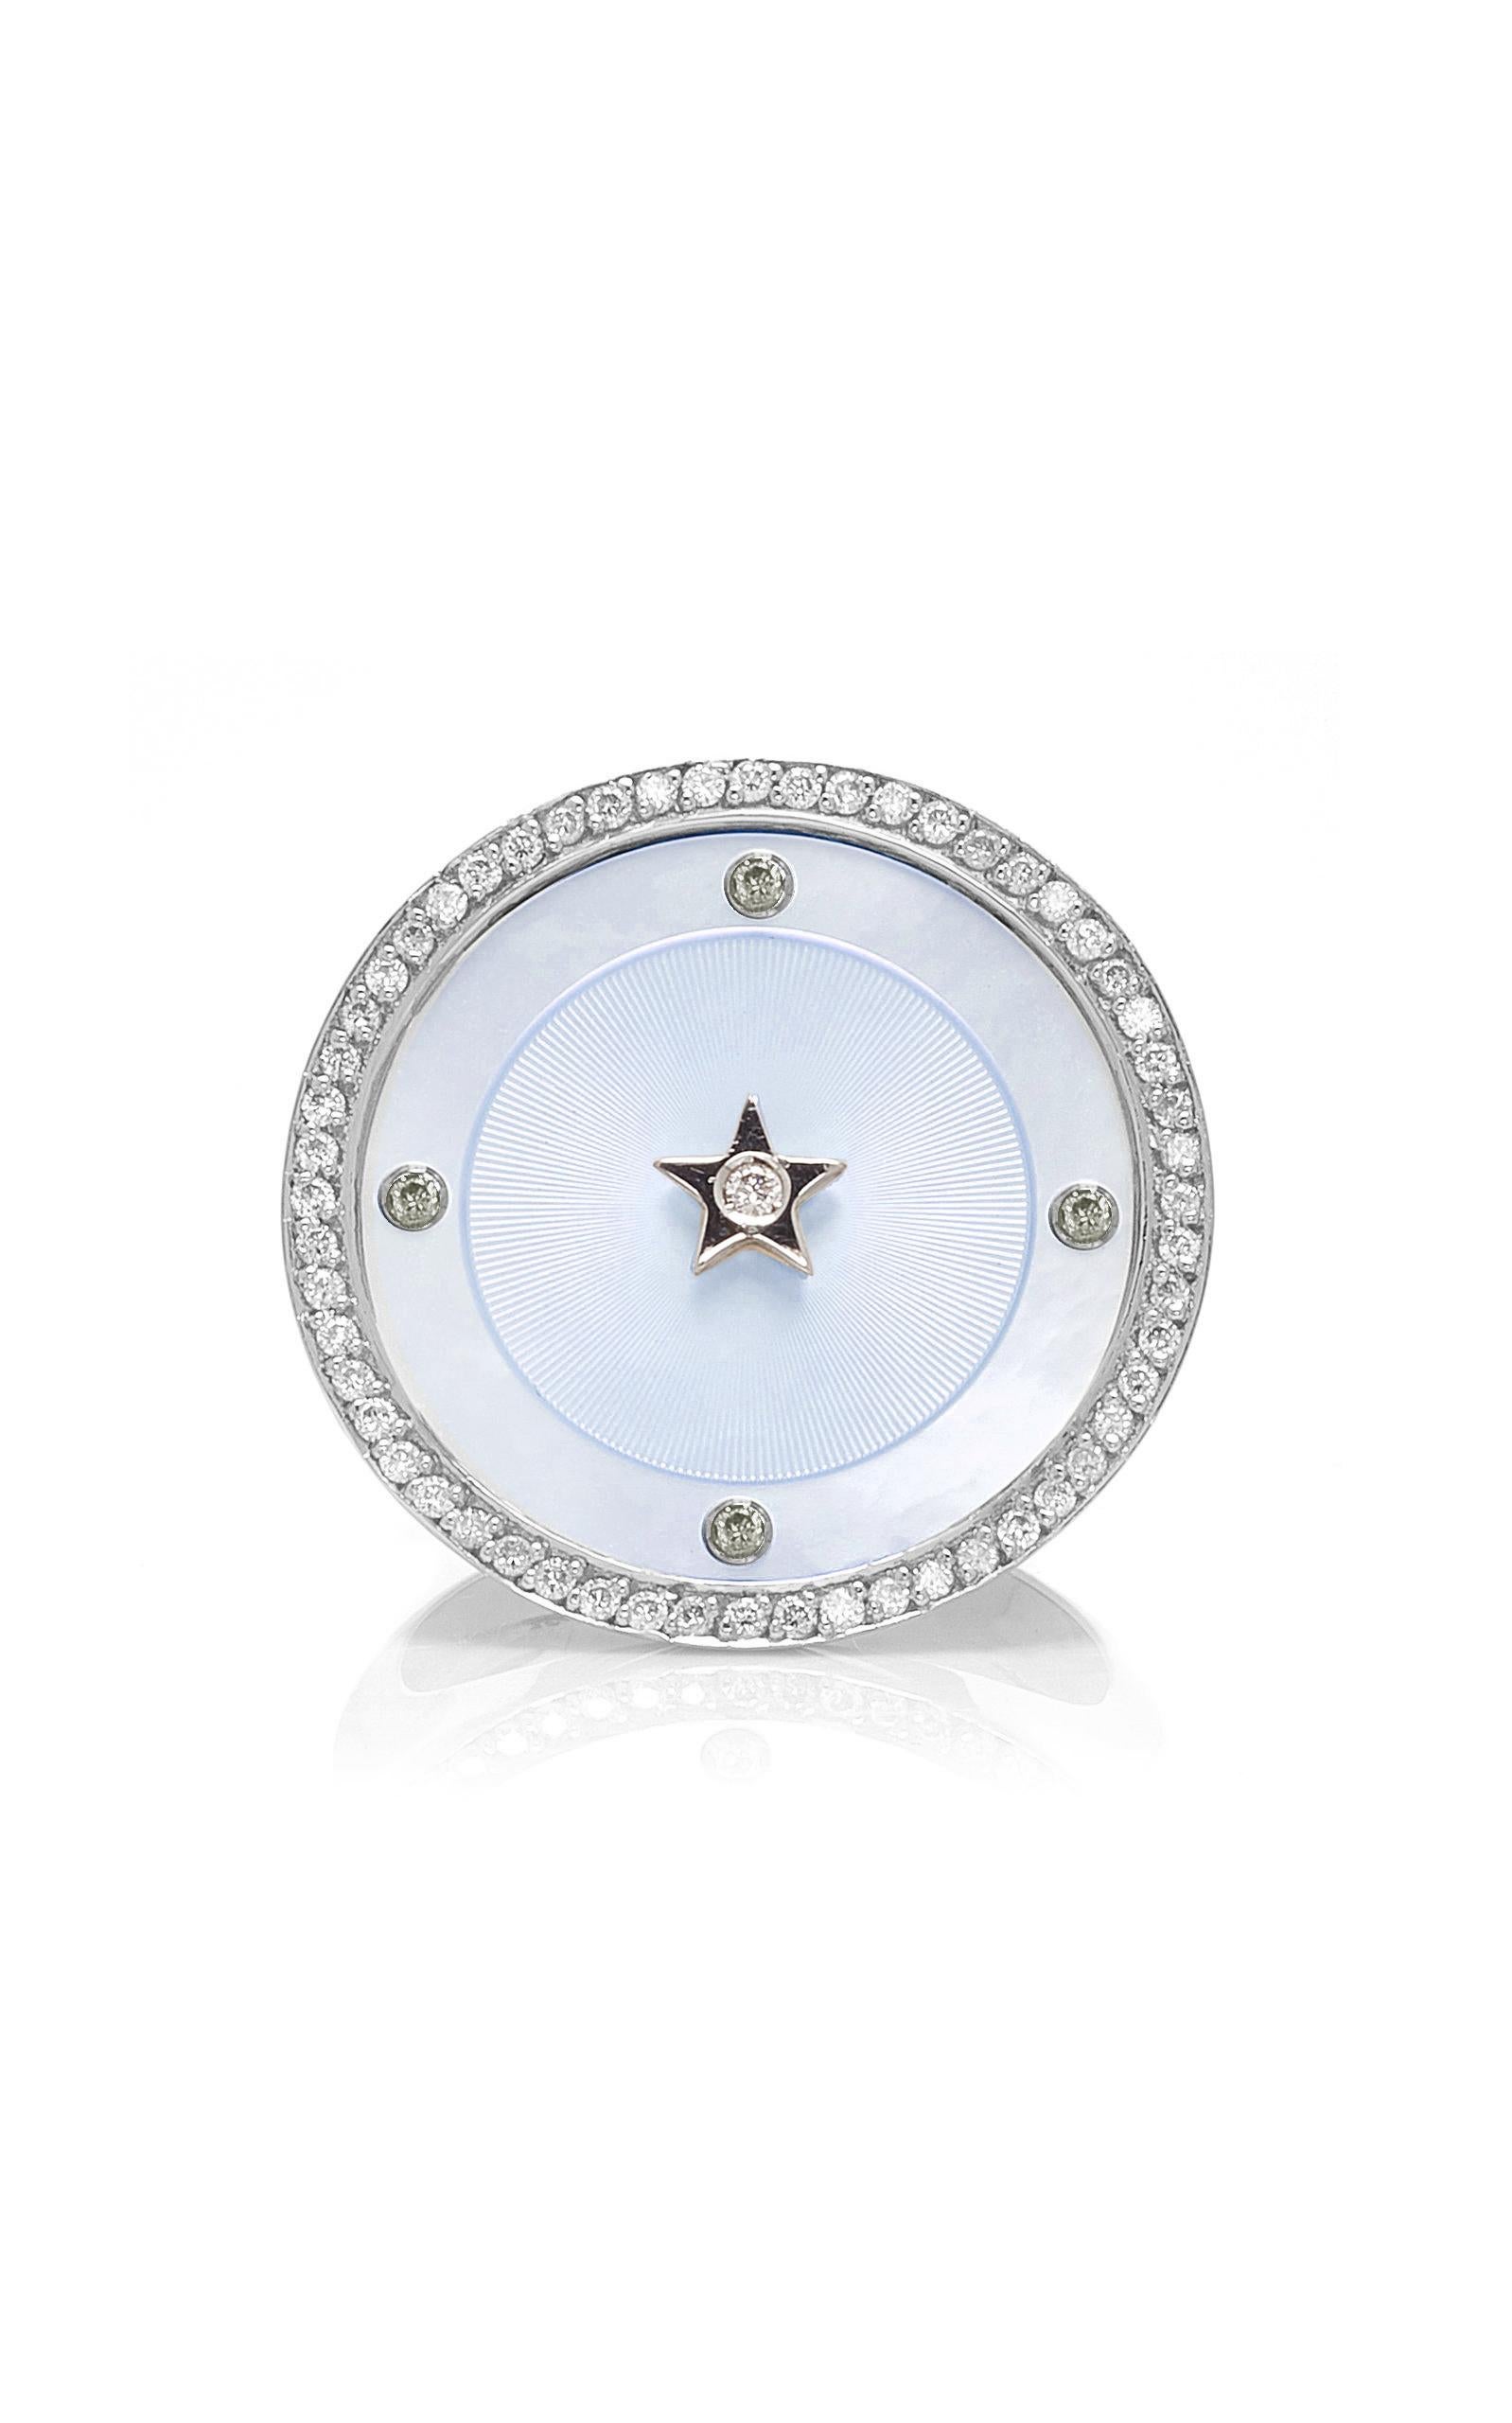 Inspired by the concept of time, Anna Maccieri Rossi's 'ORA Chevalier Ring' features a light blue mother of pearl dial where the hours of the day are marked by multicolored sapphires with a white diamond star at center.
PRODUCT DETAILS
Slips